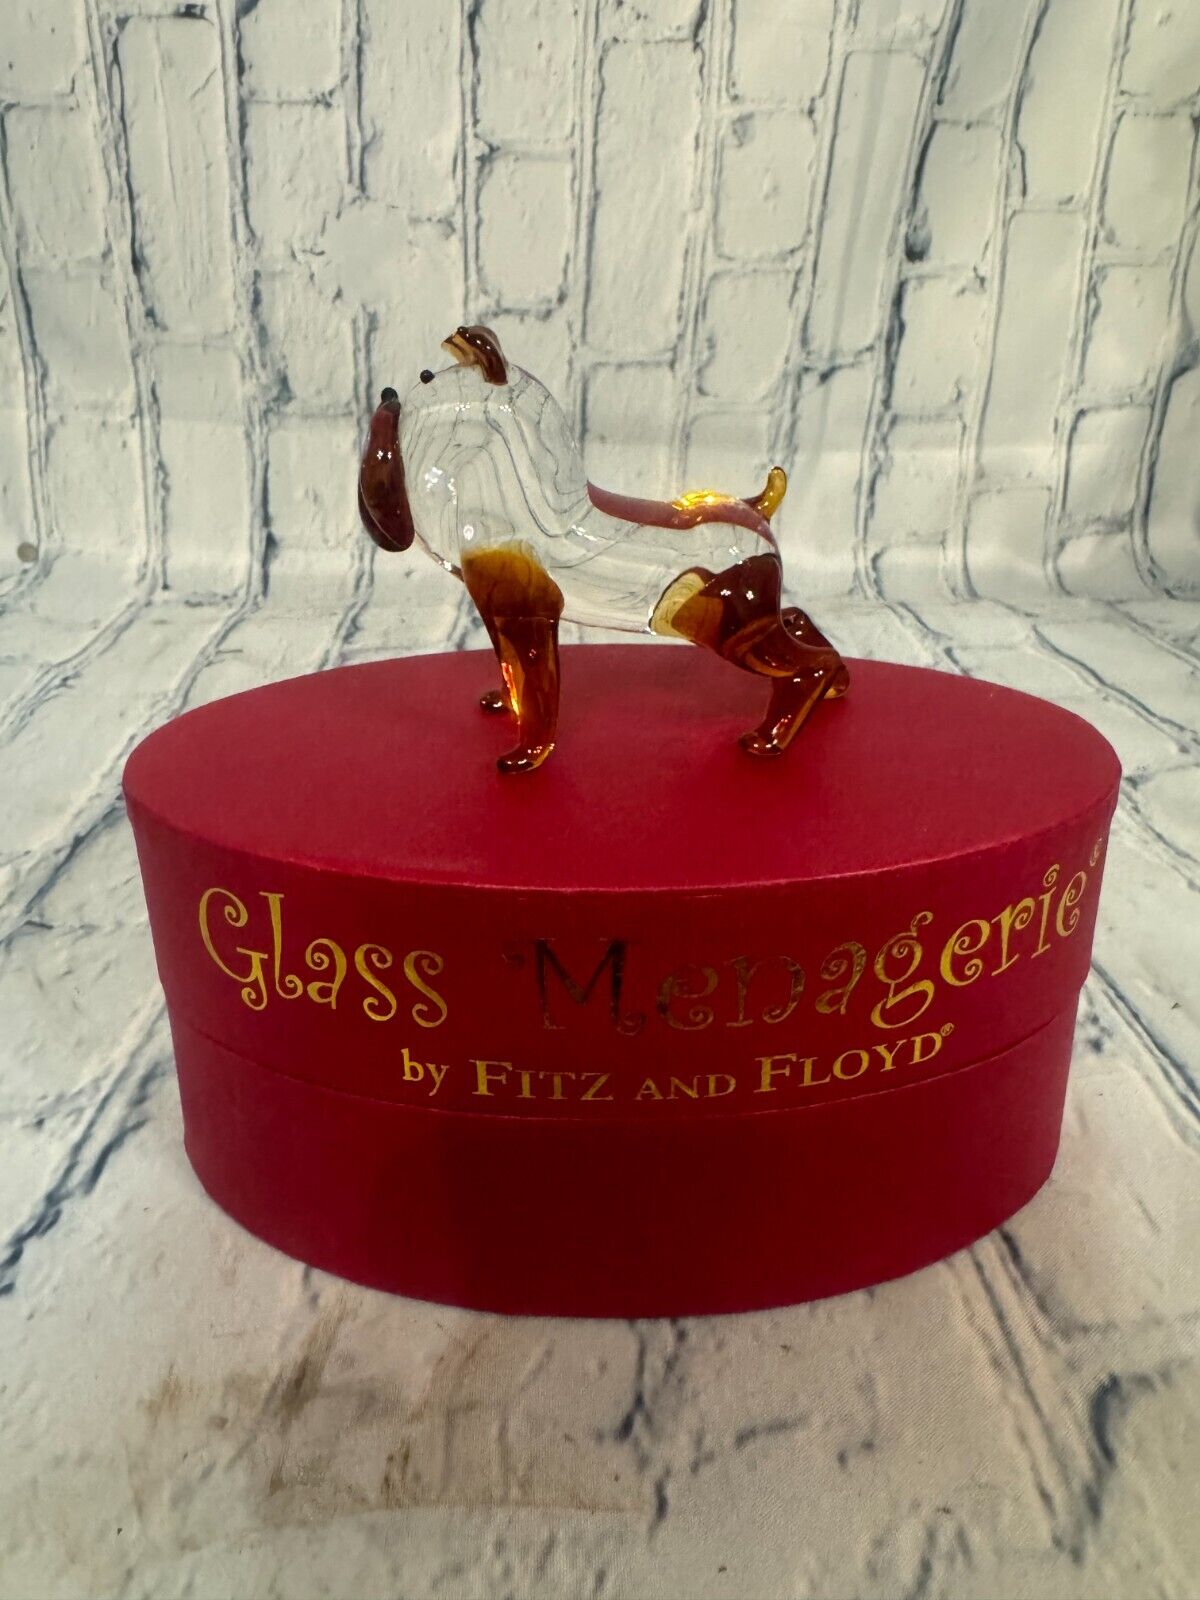 Fitz And Floyd 2009 Glass Bull Dog Glass Menagerie 43/134 with case